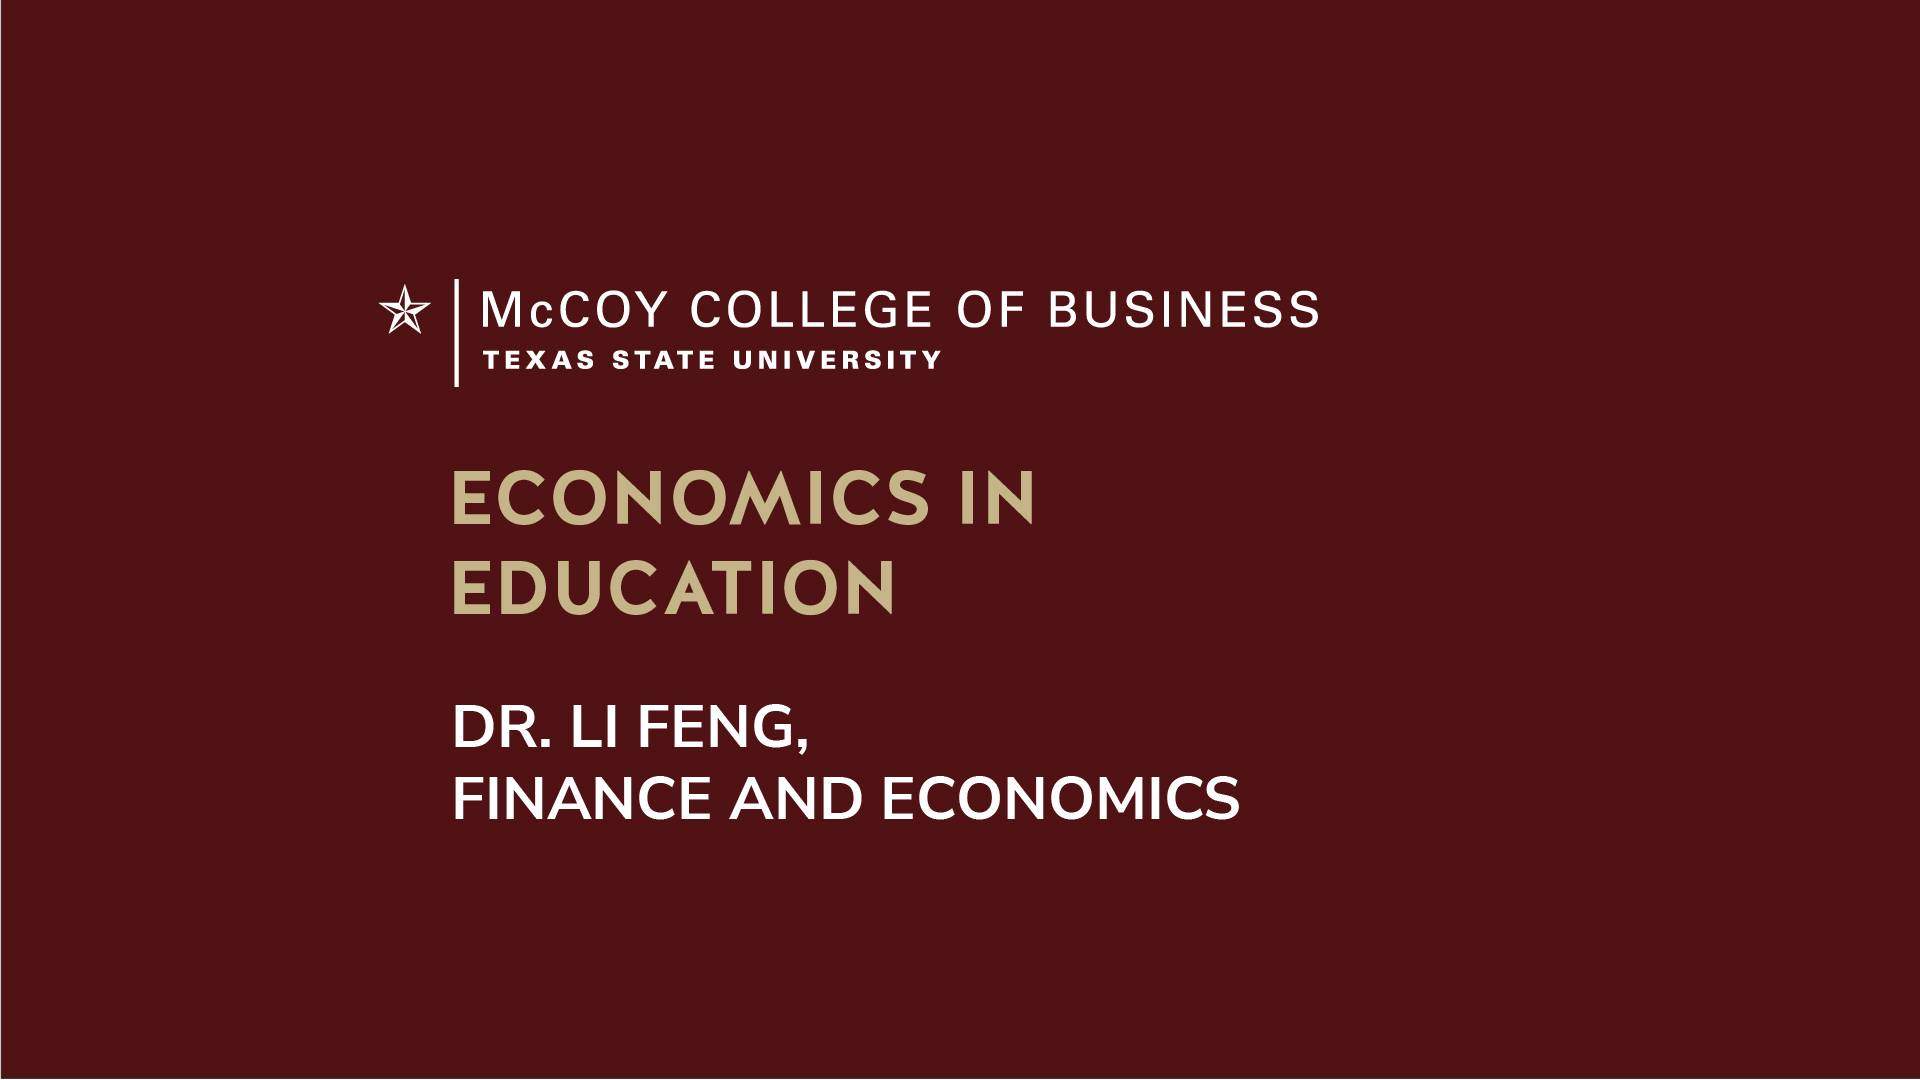 Dr. Li Feng discusses her research on the economics of education